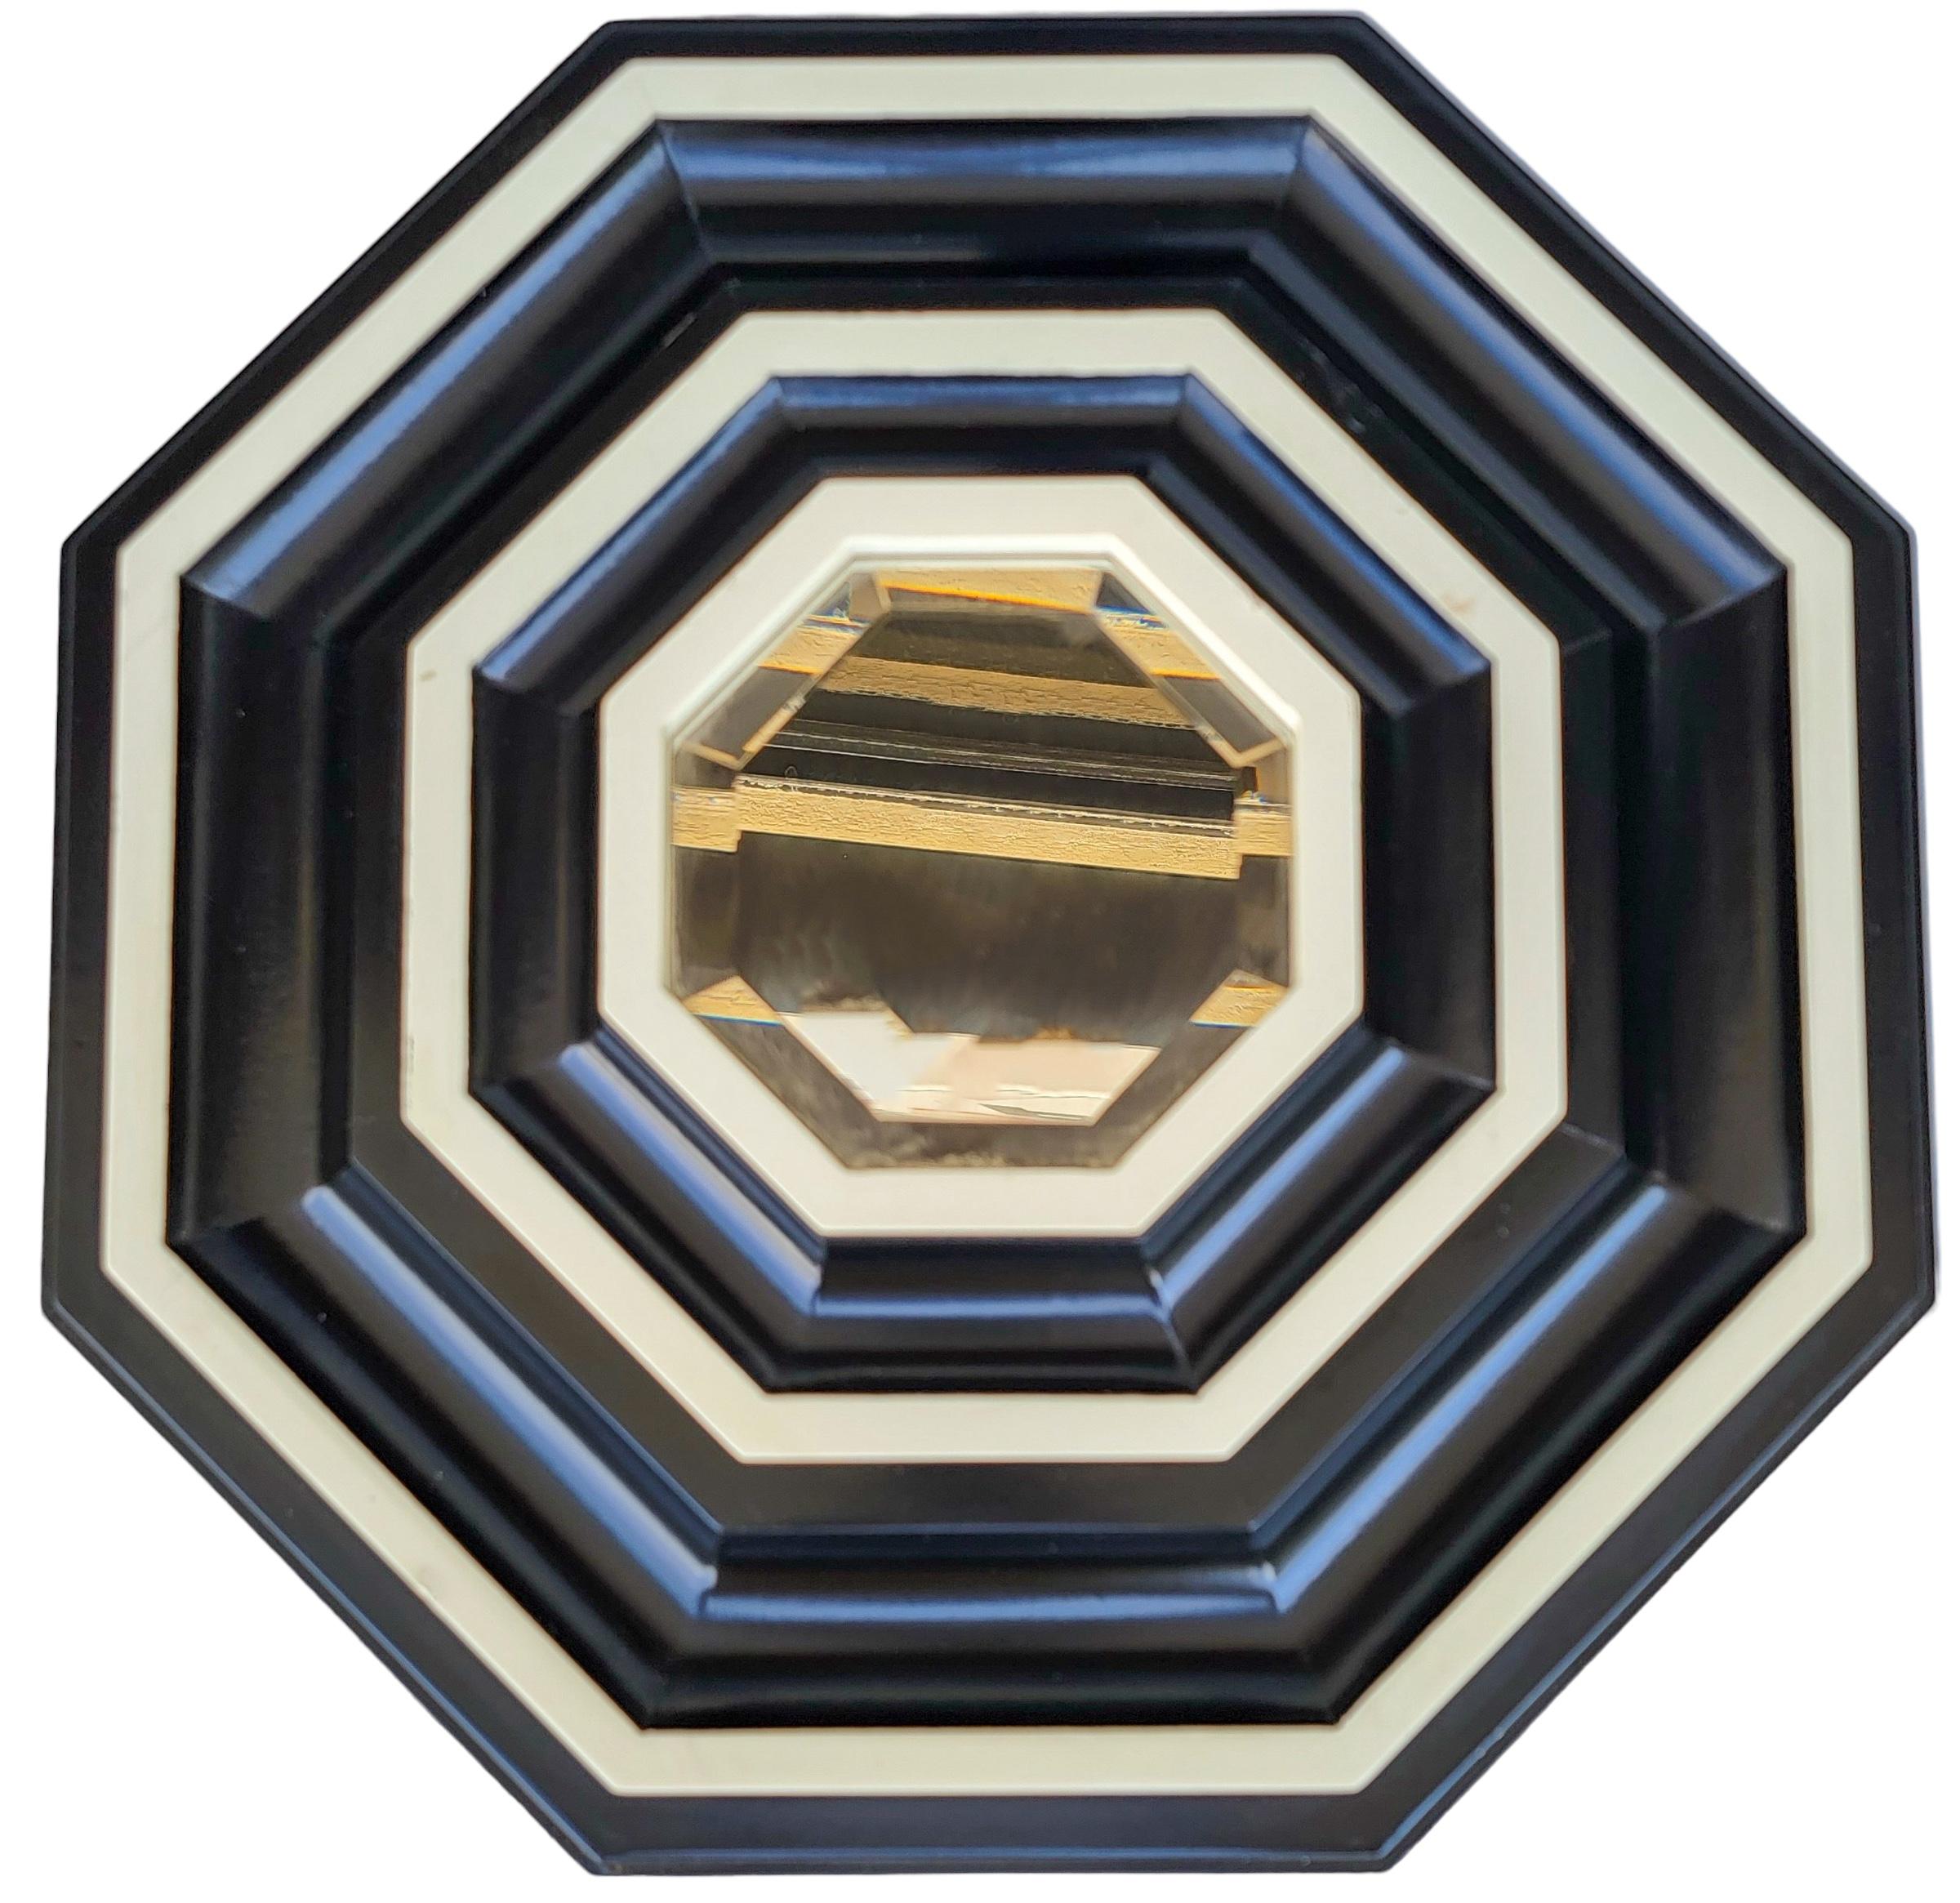 This is a very striking pair of mirrors. They have a hexagon form with ebony and ivory alternating layers. The mirrors are beveled. The pair are unmarked and in very good condition.